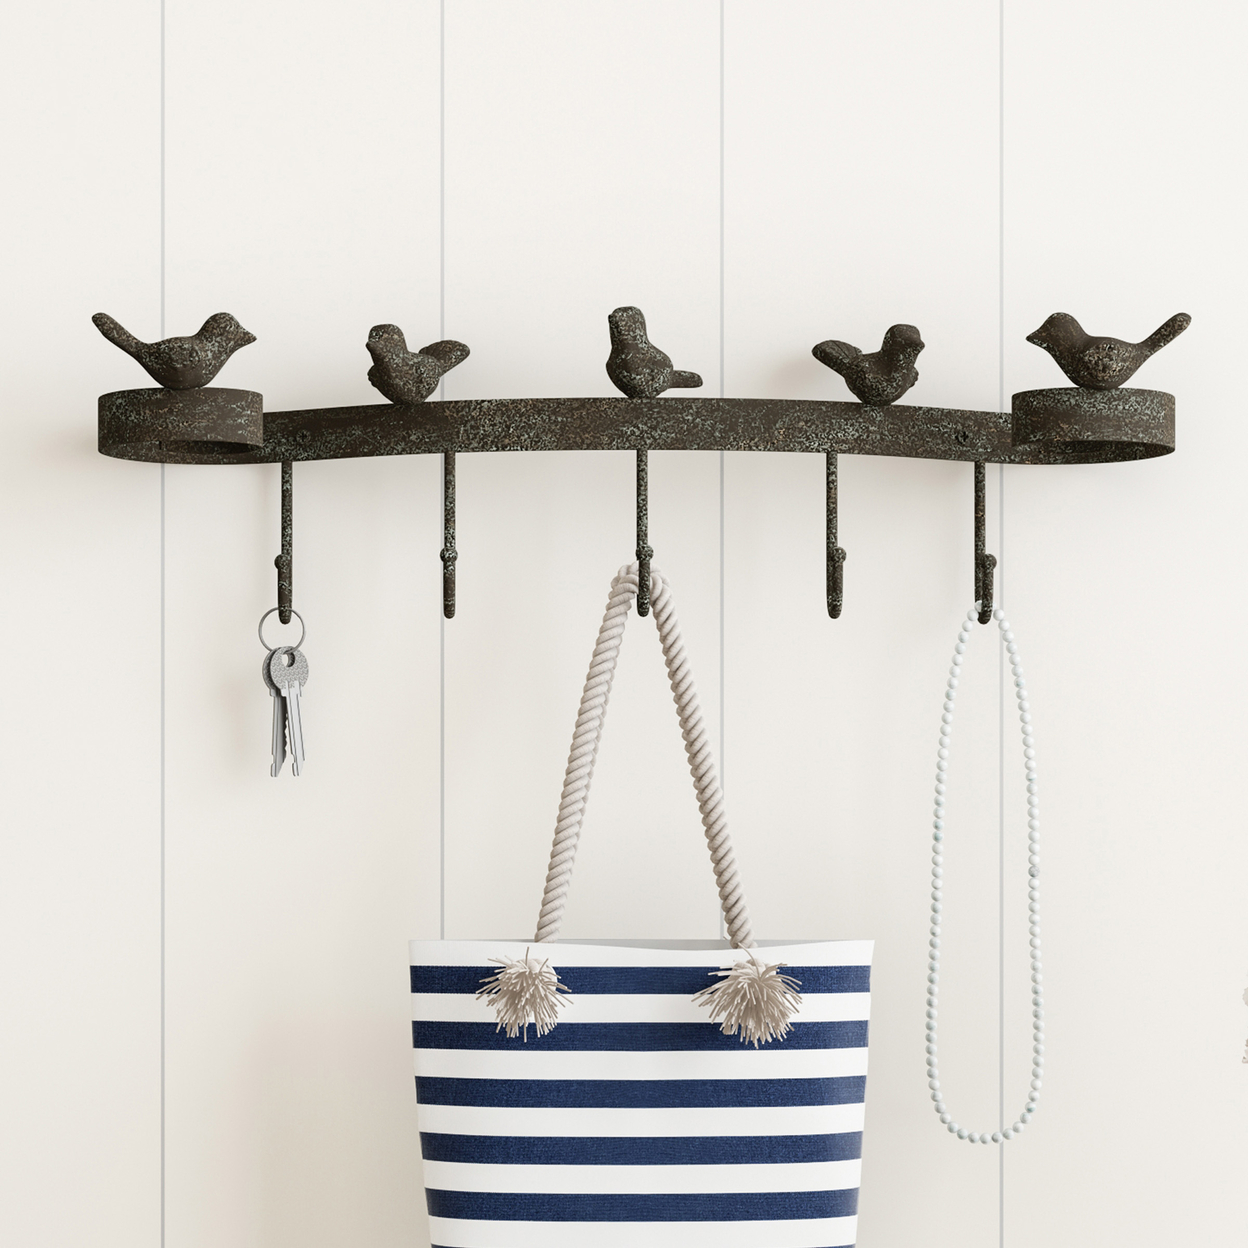 Cast Iron Rustic Birds With 5 Hooks Wall Mounted Home Decor 19 In Wide